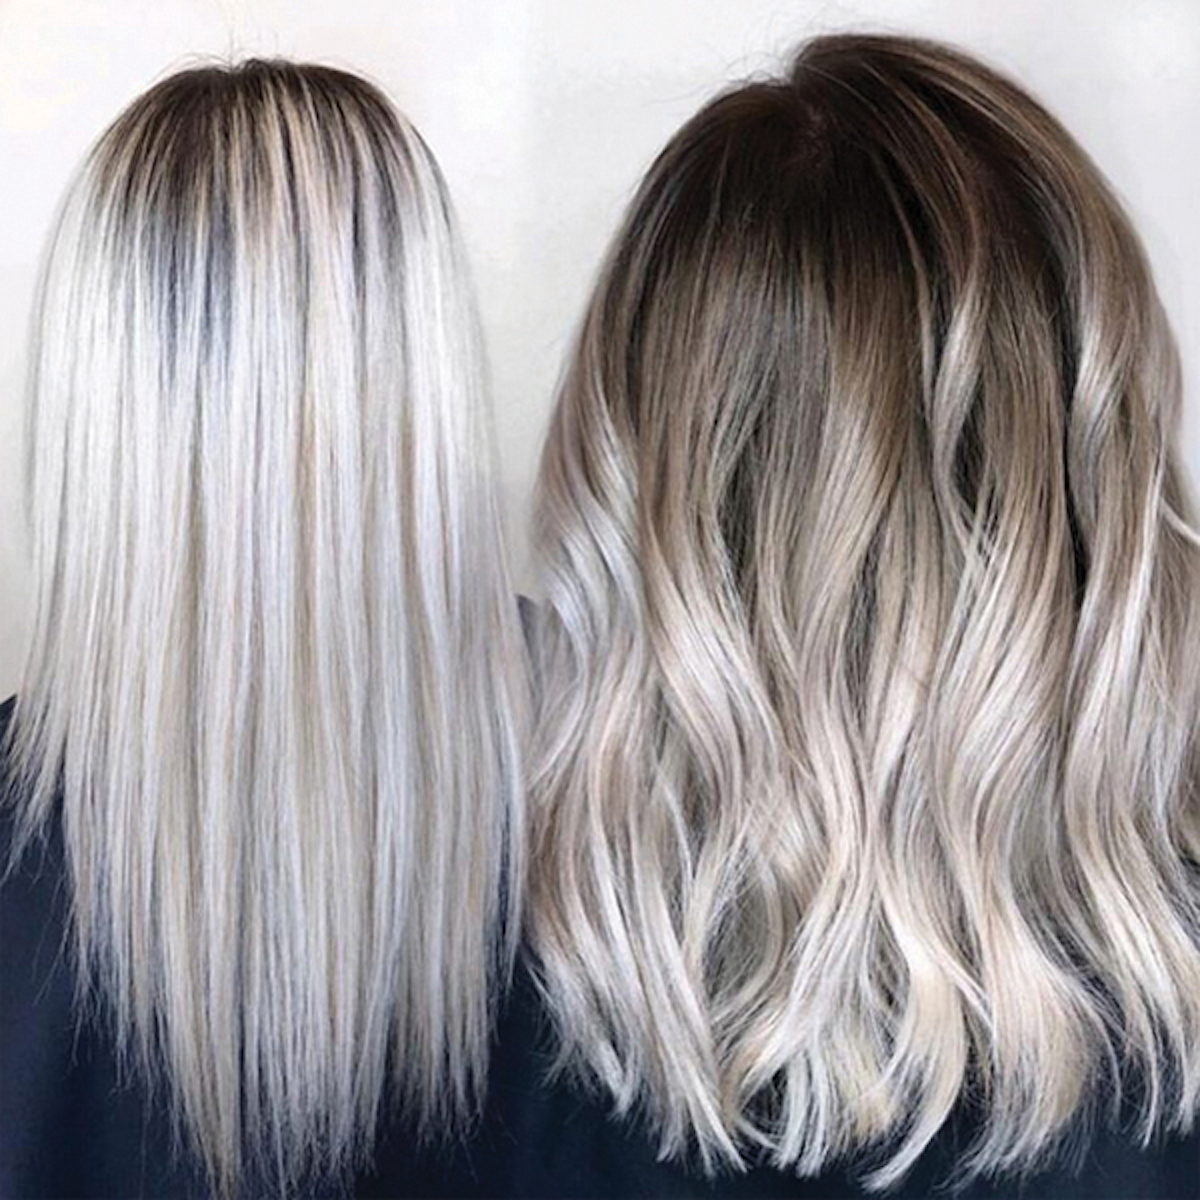 Ramp Up Your Balayage Game with These Tips From Expert Colorists ...